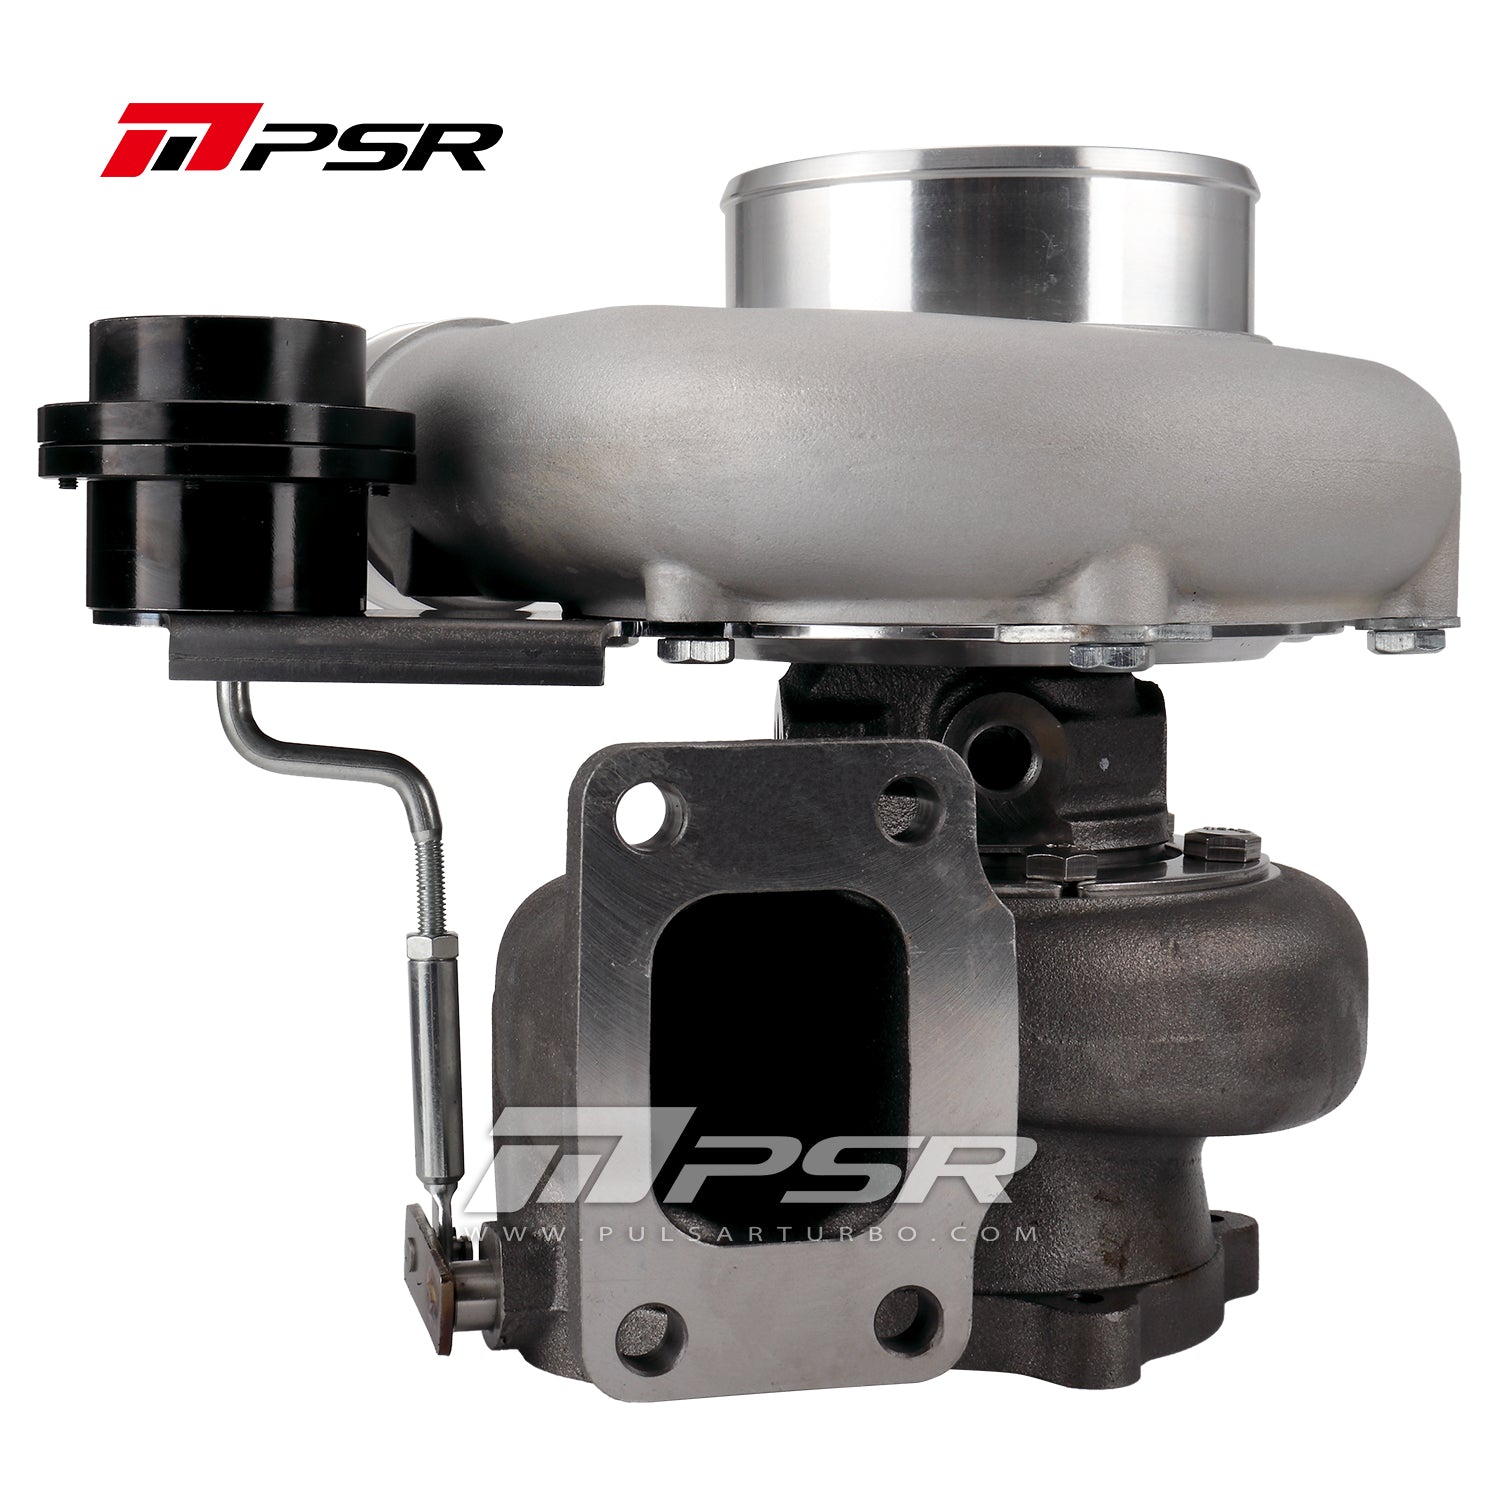 PSR6774R GEN3 Ball Bearing Turbo for Ford Falcon to replace the factory GT3582R turbo